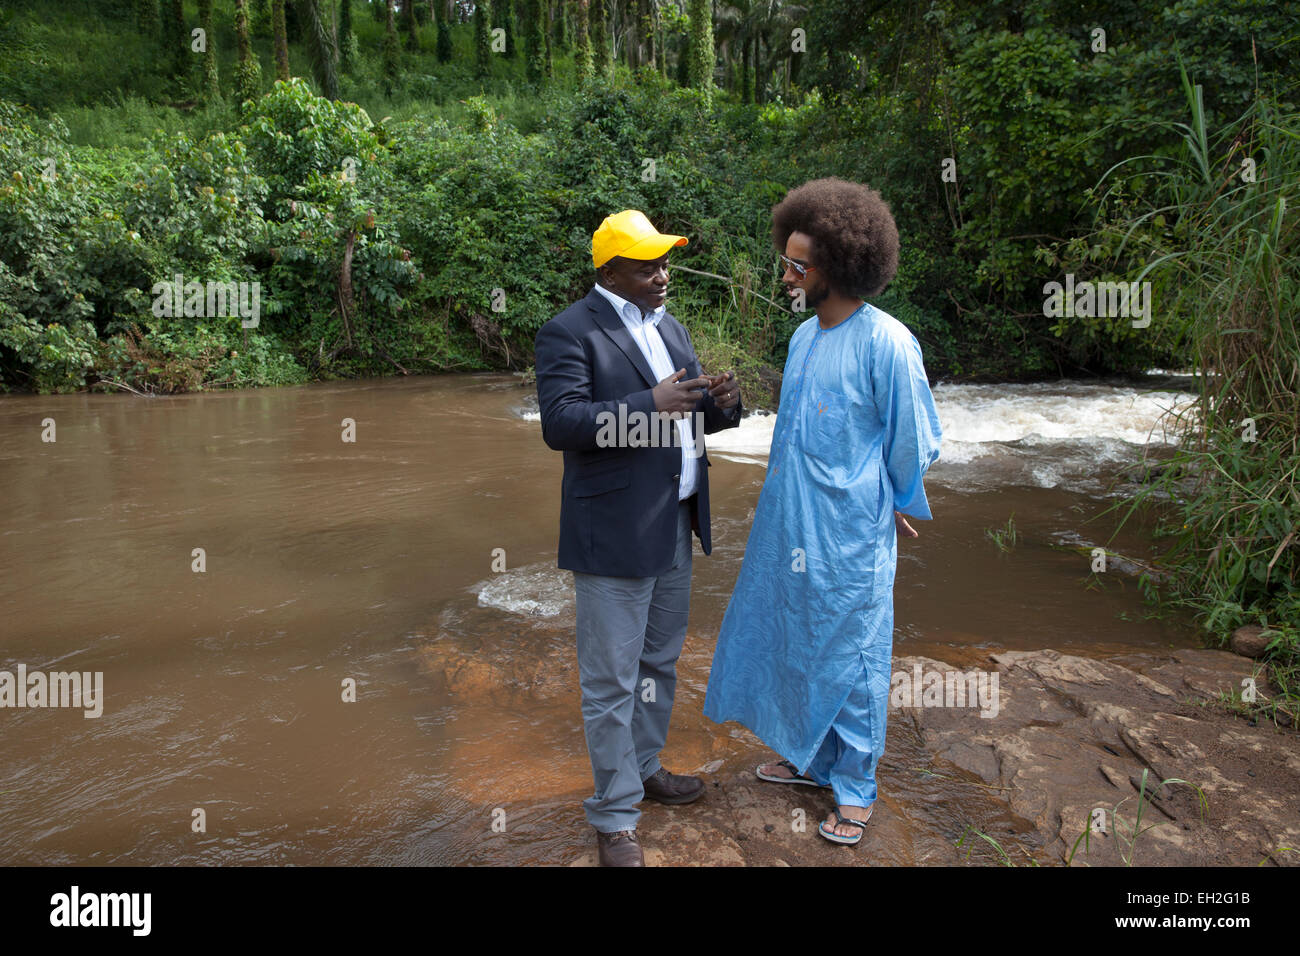 Dr Joseph Oye explains to footballer Benoit Assou-Ekotto, how river blindness is spread by a fly near fast-flowing rivers. Stock Photo